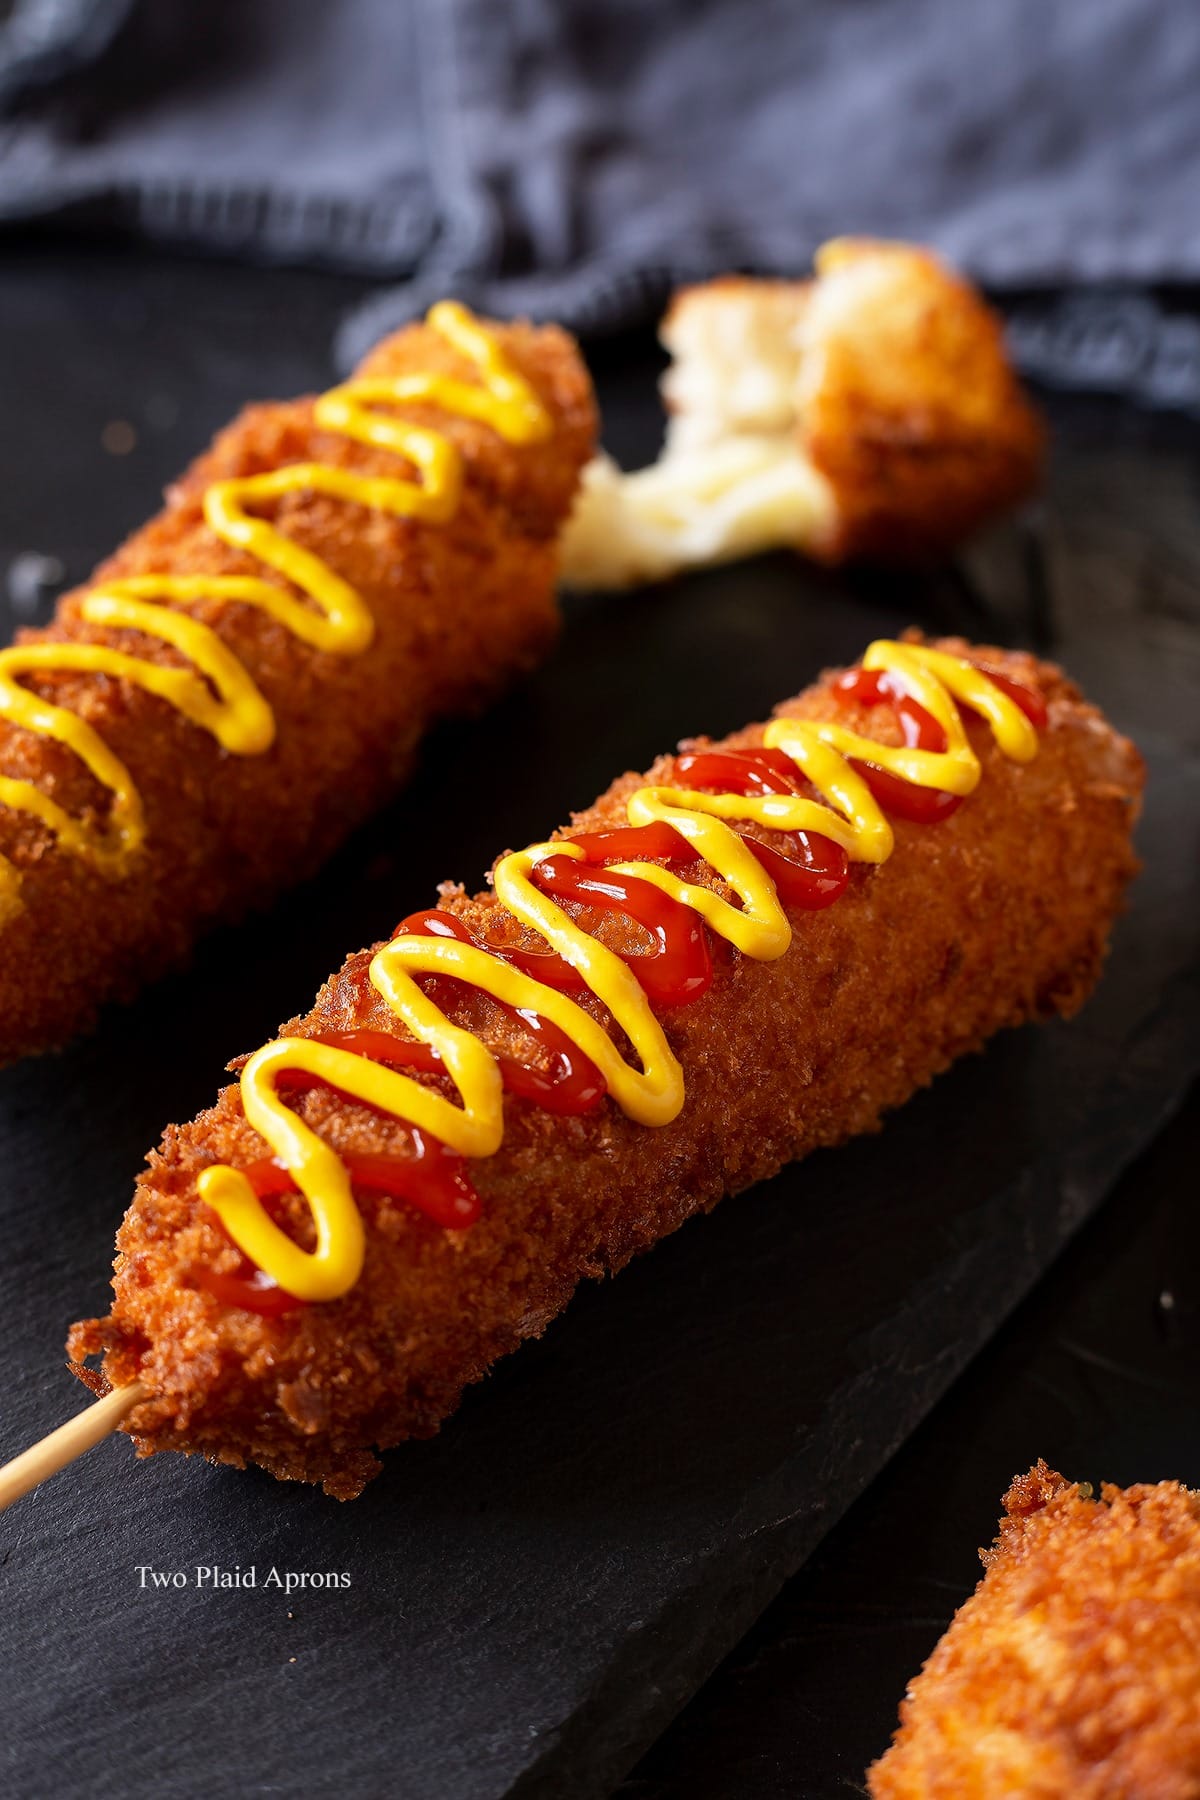 Side view of a Korean corn dog drizzled with ketchup and mustard.